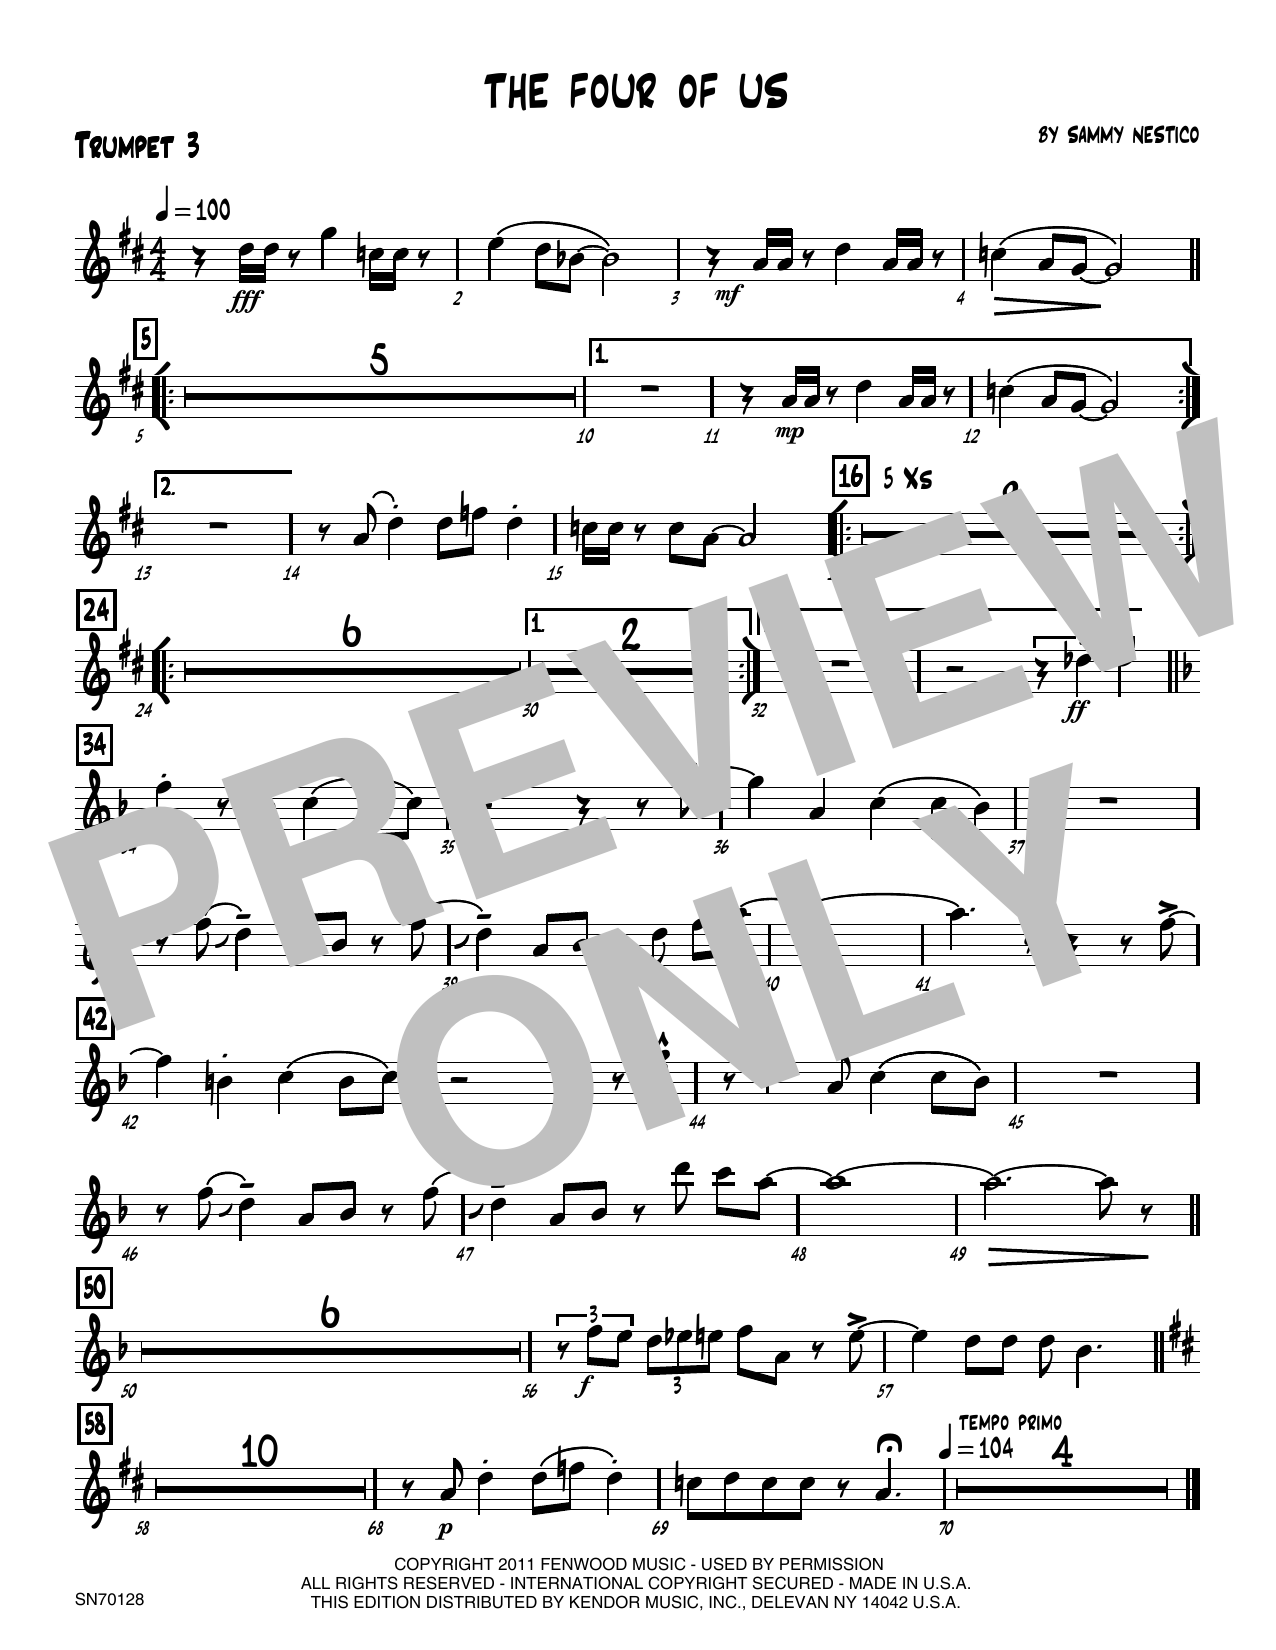 Download Sammy Nestico The Four Of Us - 3rd Bb Trumpet Sheet Music